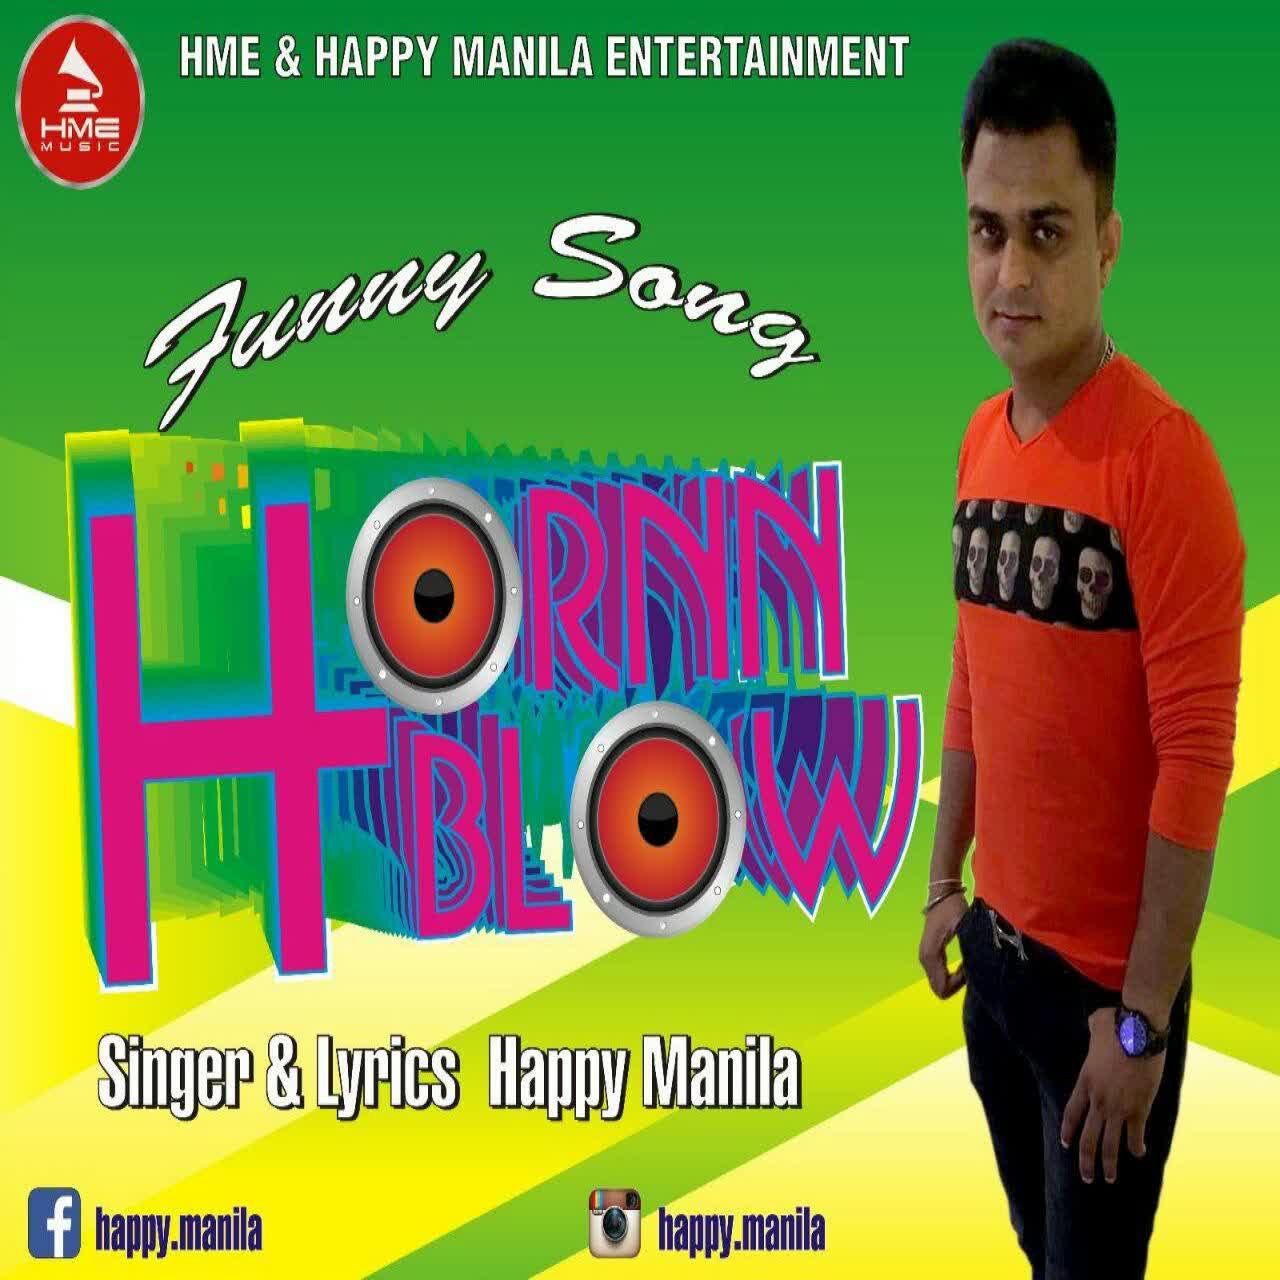 Horn Blow (Funny Song) Happy Manila mp3 song download 